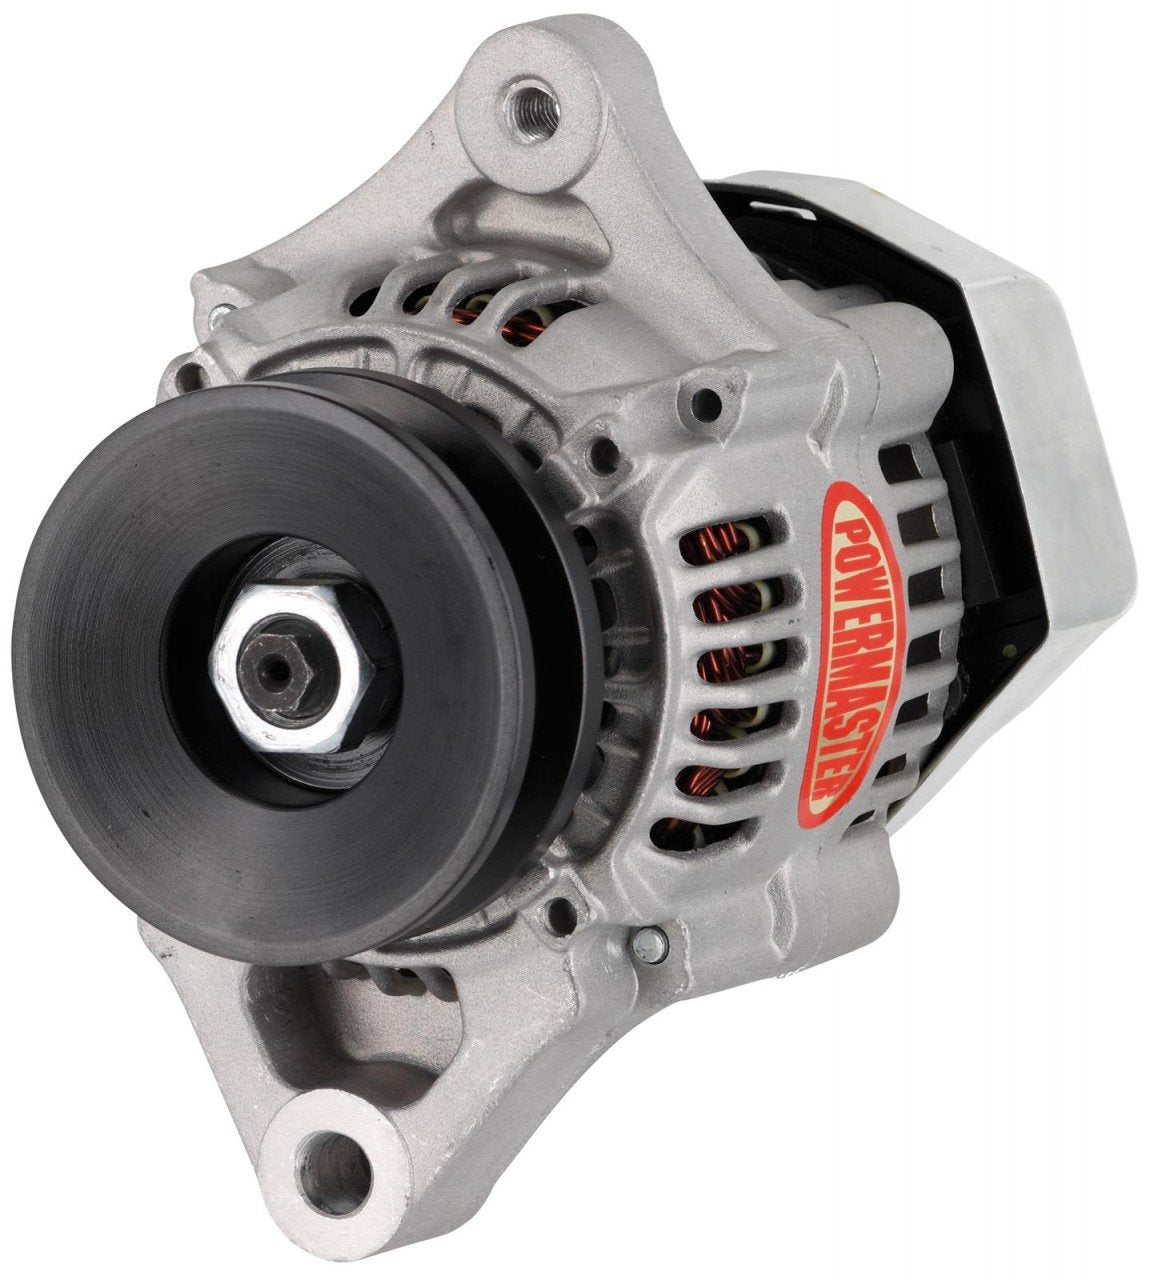 POWERMASTER ALTERNATOR. DENSO RACE 93MM.  55AMP. 1V PULLEY.  1 WIRE . 12V OUTPUT MAX/IDLE: 55/30A